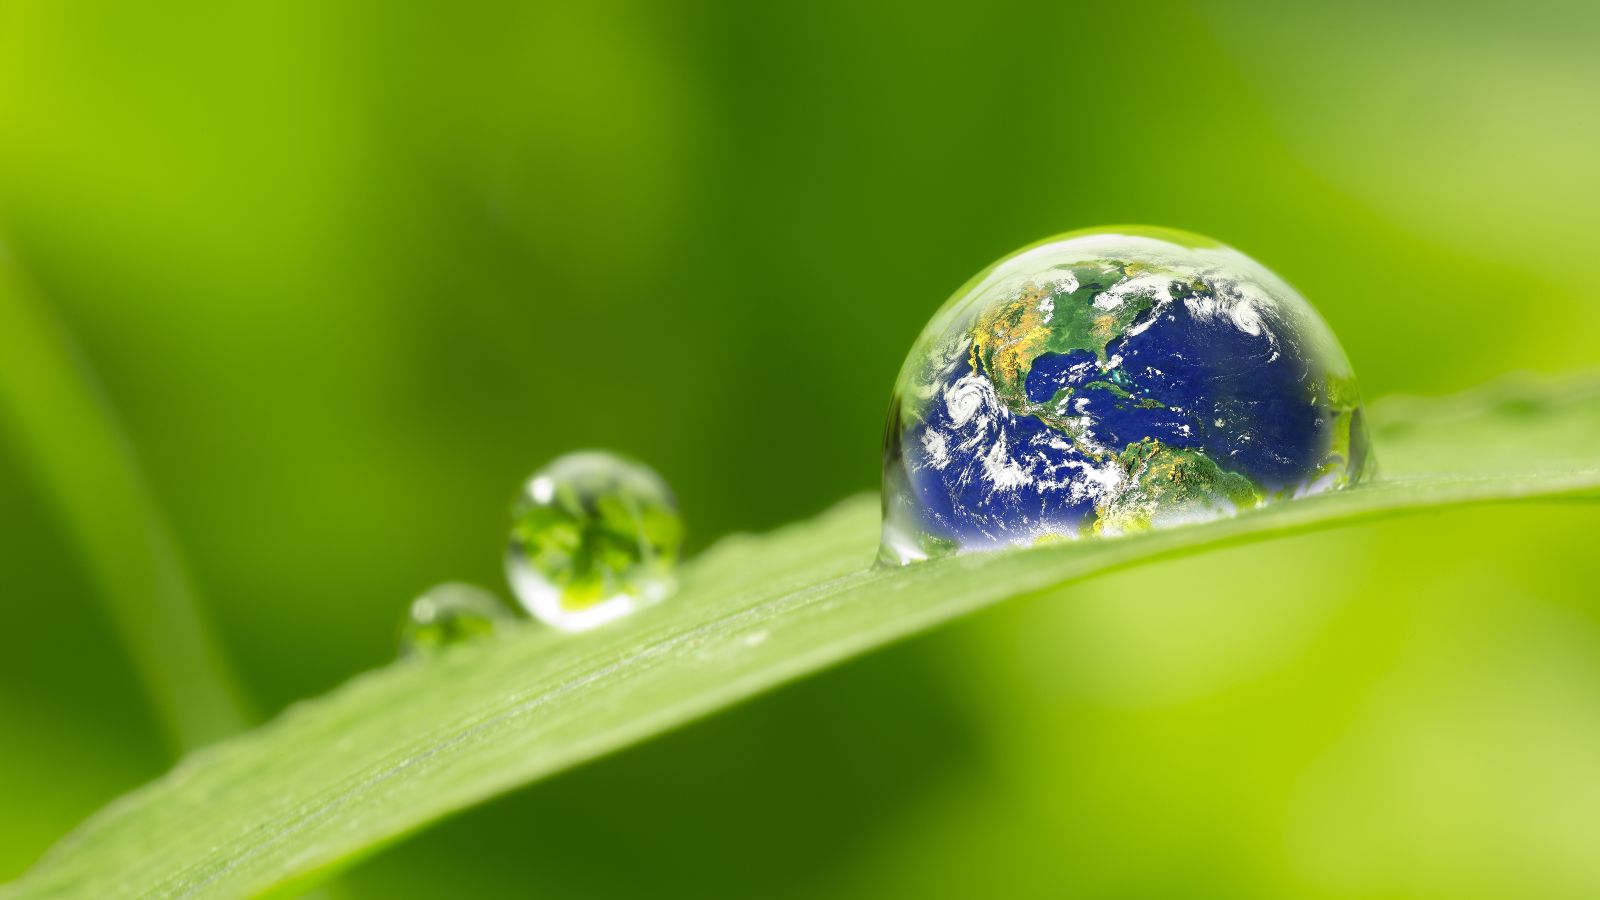 The image is a photomontage: the globe can be seen on a drop on a green leaf. 